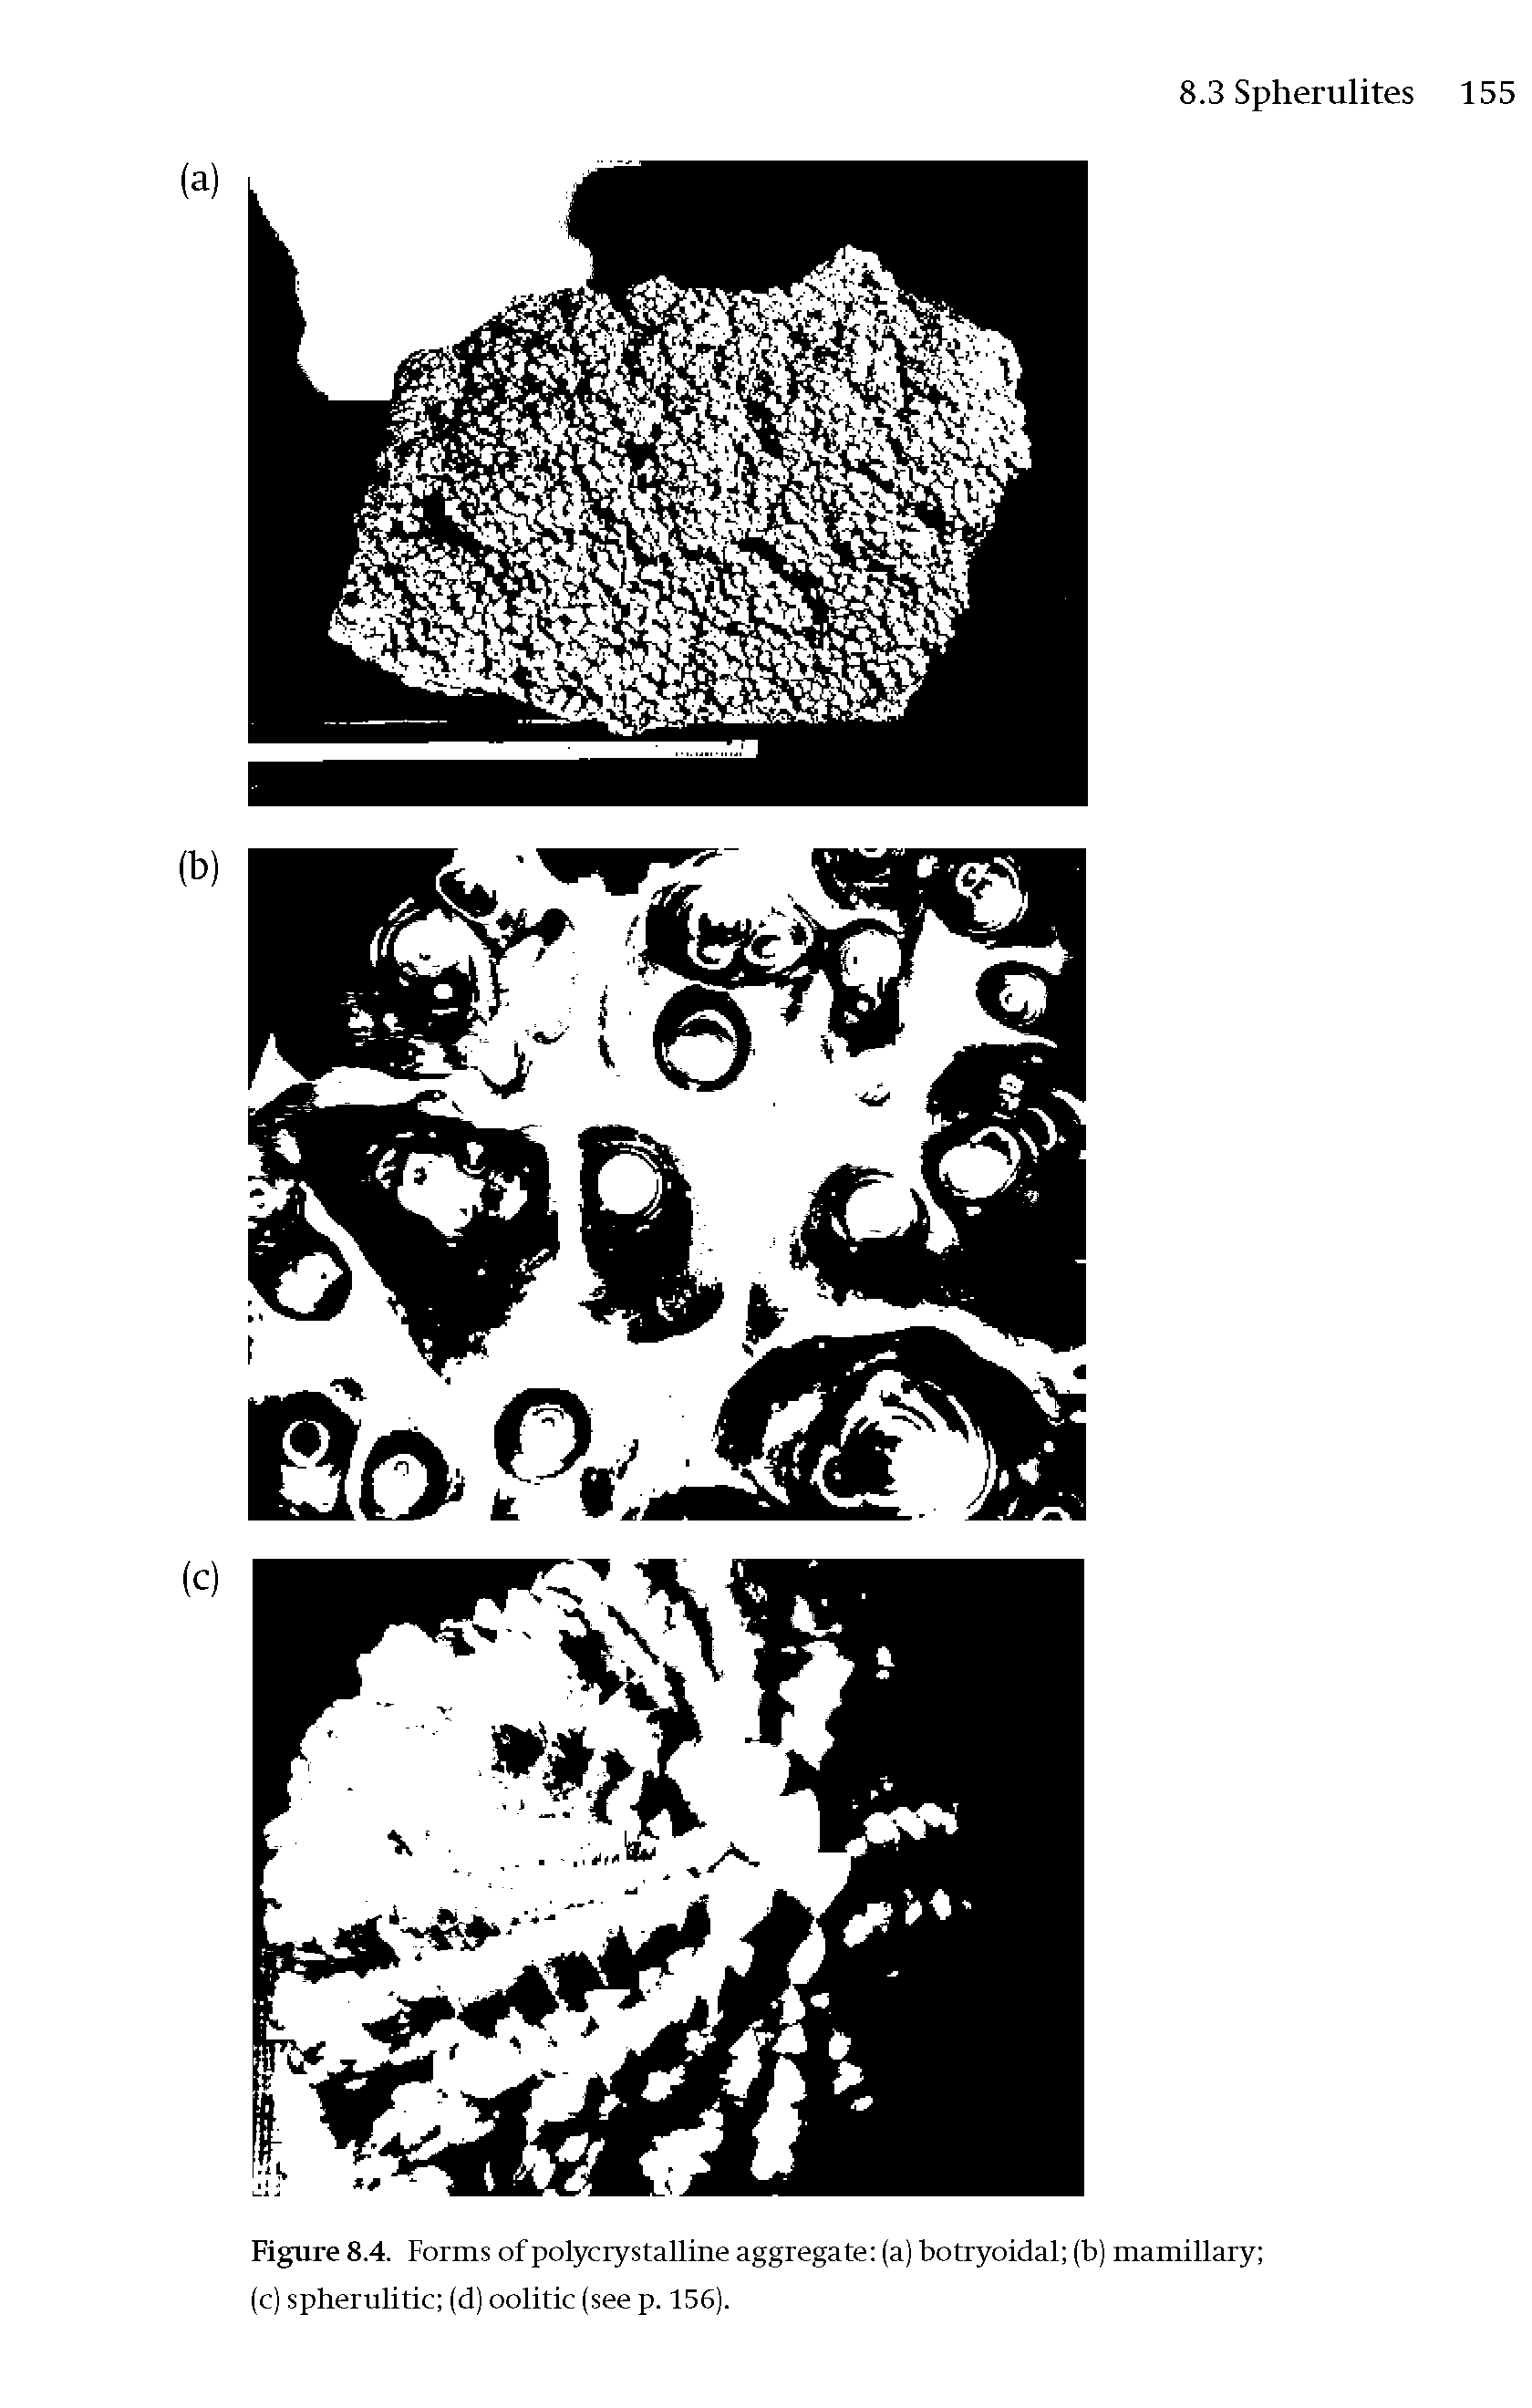 Figure 8.4. Forms of polycrystalline aggregate (a) botryoidal (b) mamillary (c) spherulitic (d) oolitic (see p. 156).